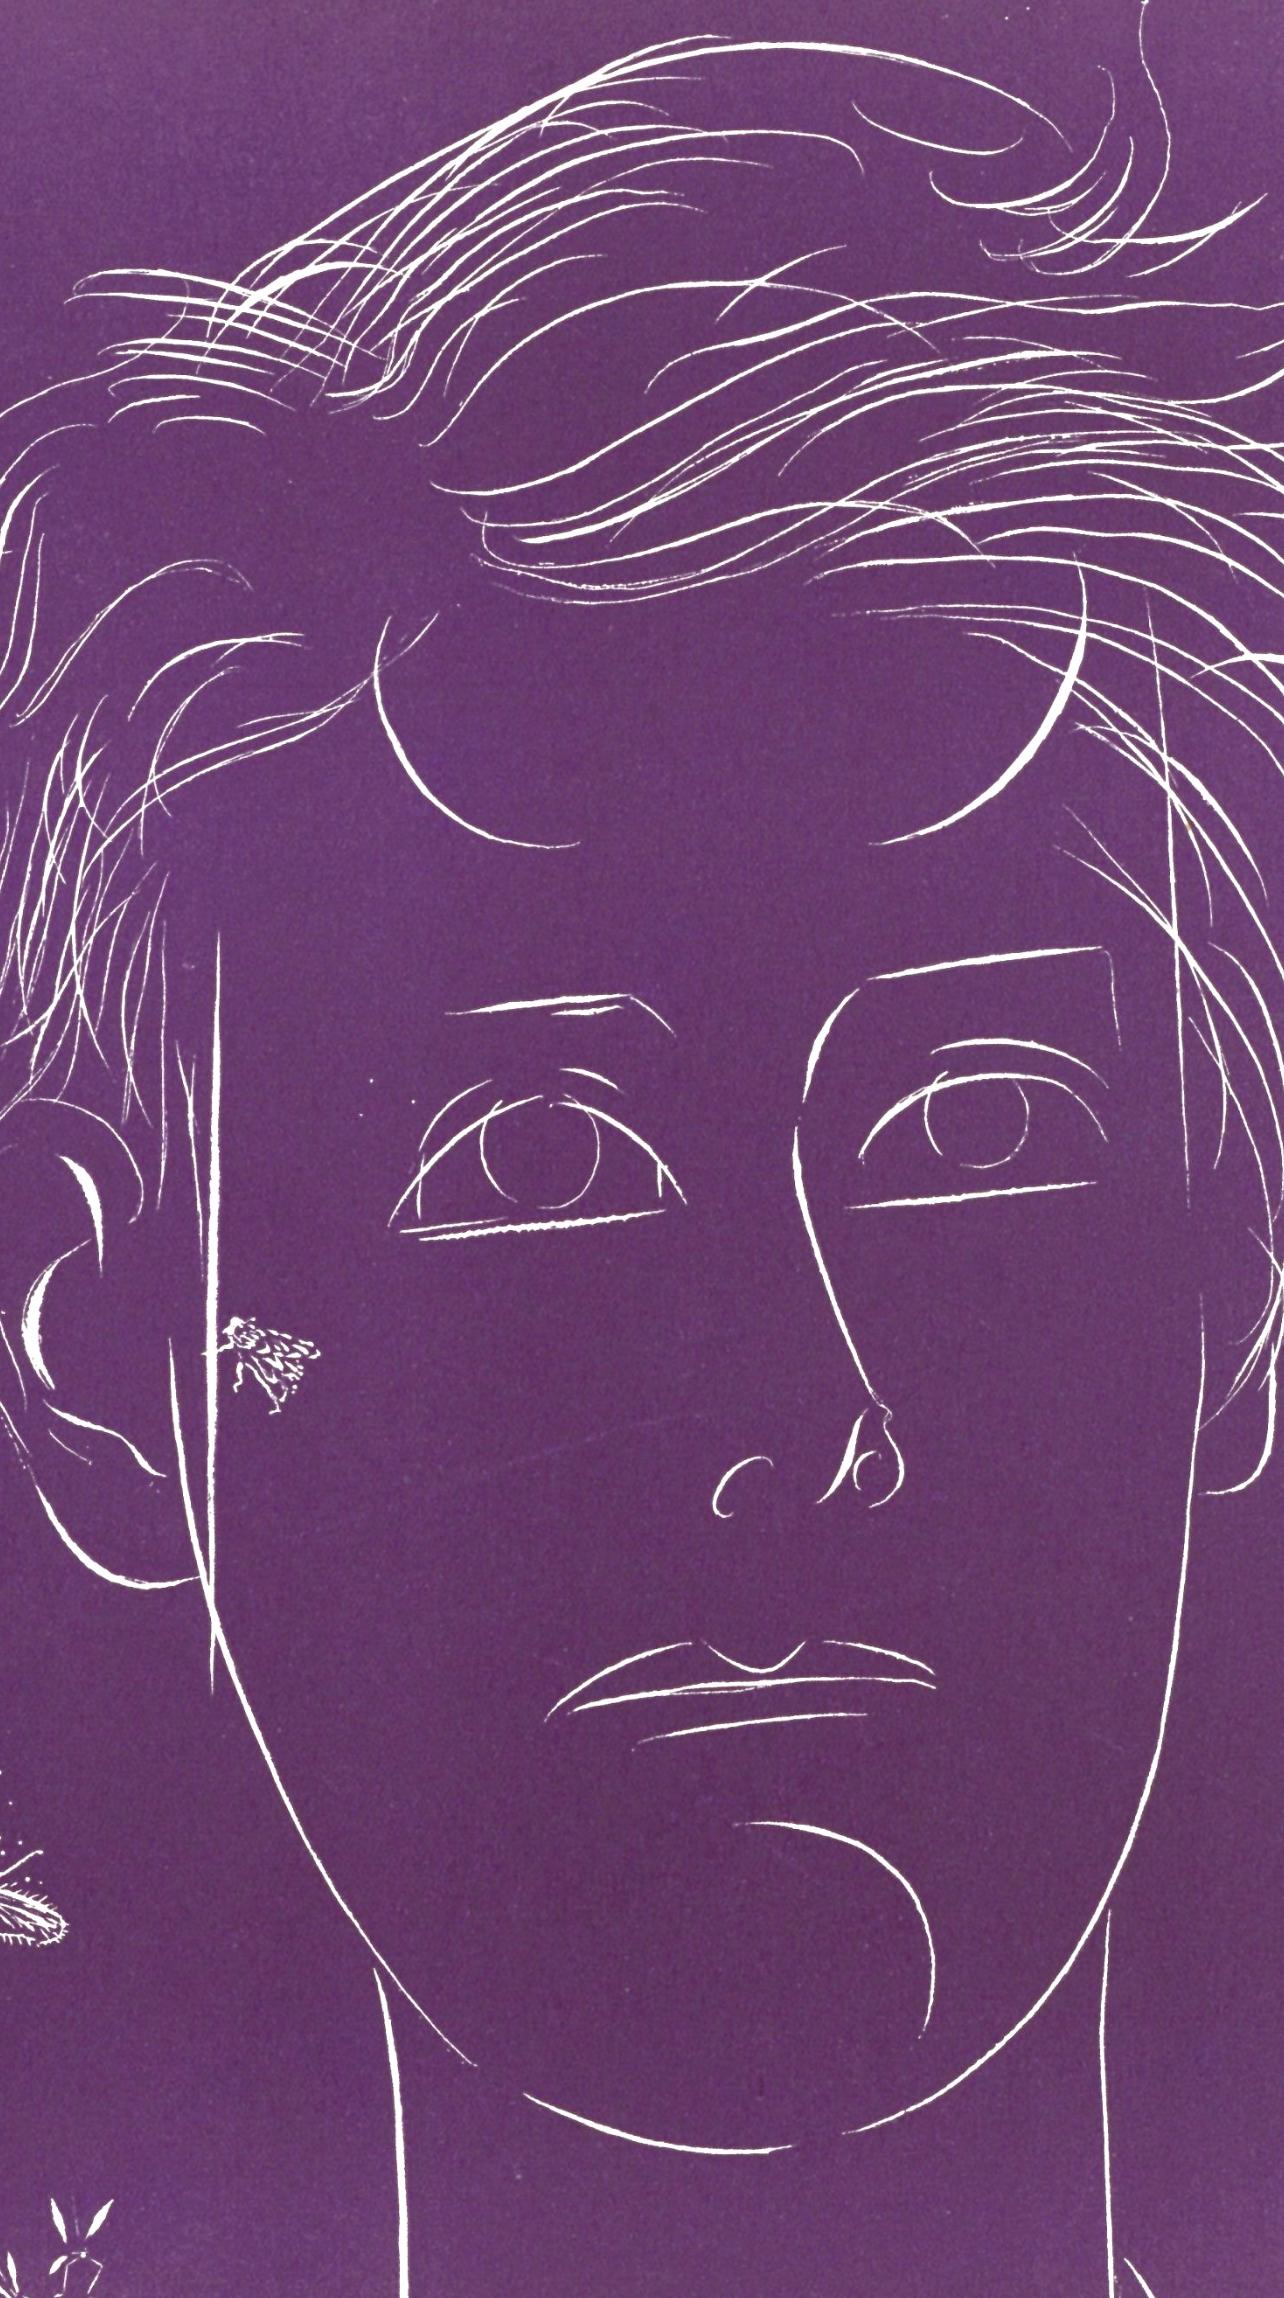 Marcoussis, Rimbaud, XXe Siècle (after) - Print by Louis Marcoussis